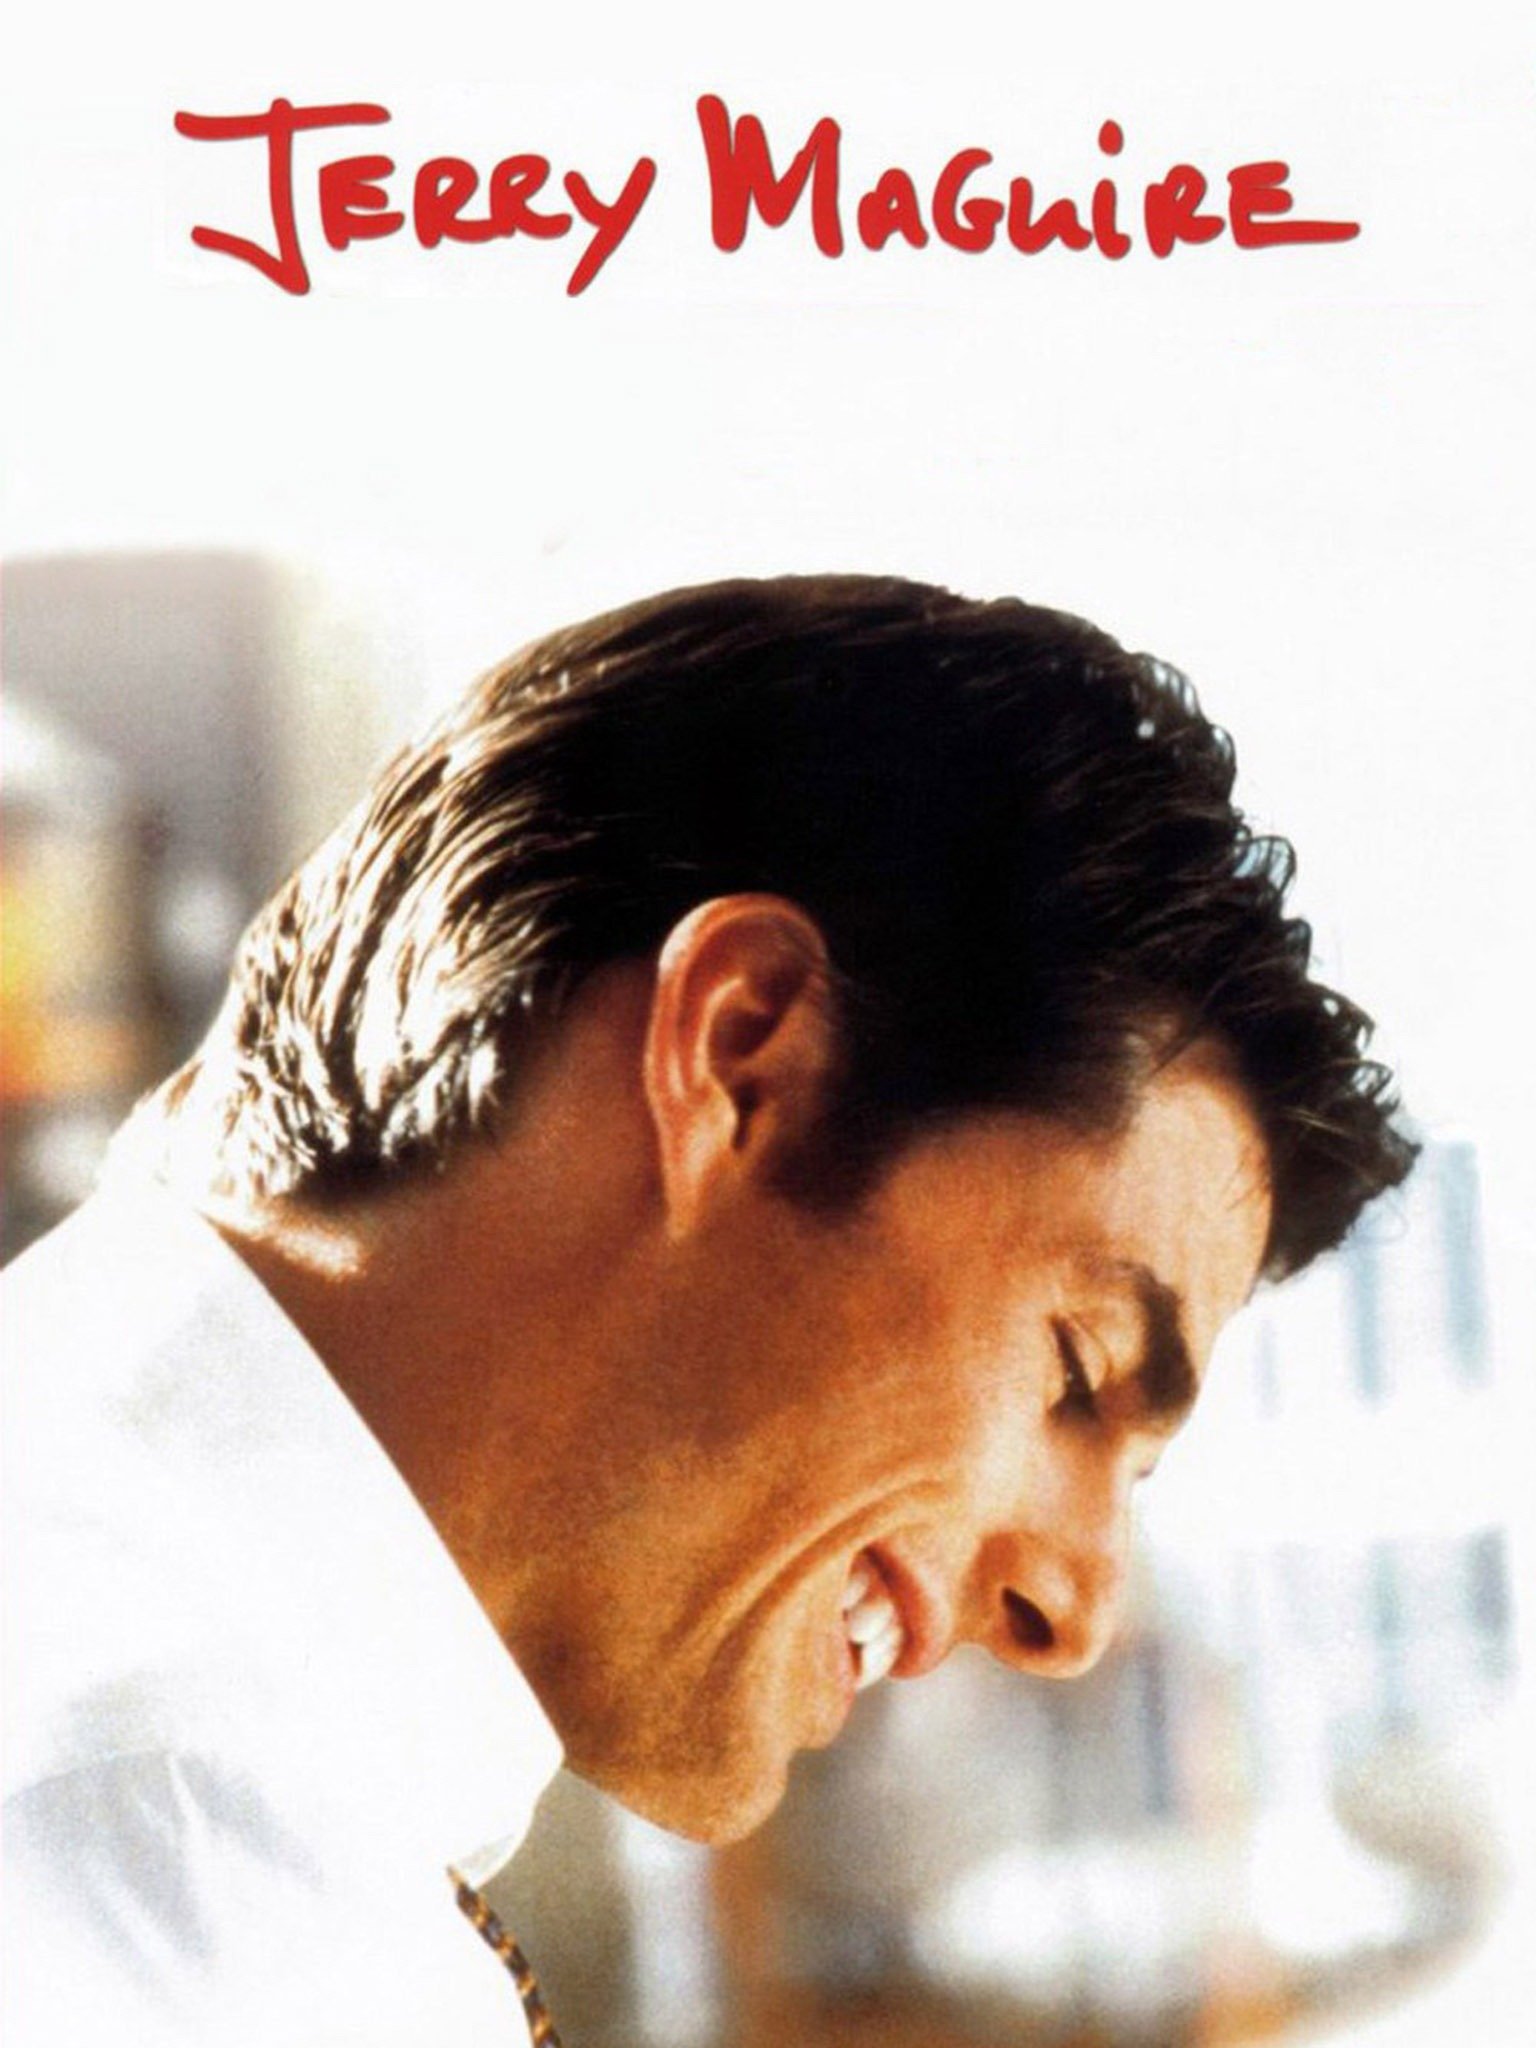 Jerry Maguire 1996 Full Movie Online In Hd Quality